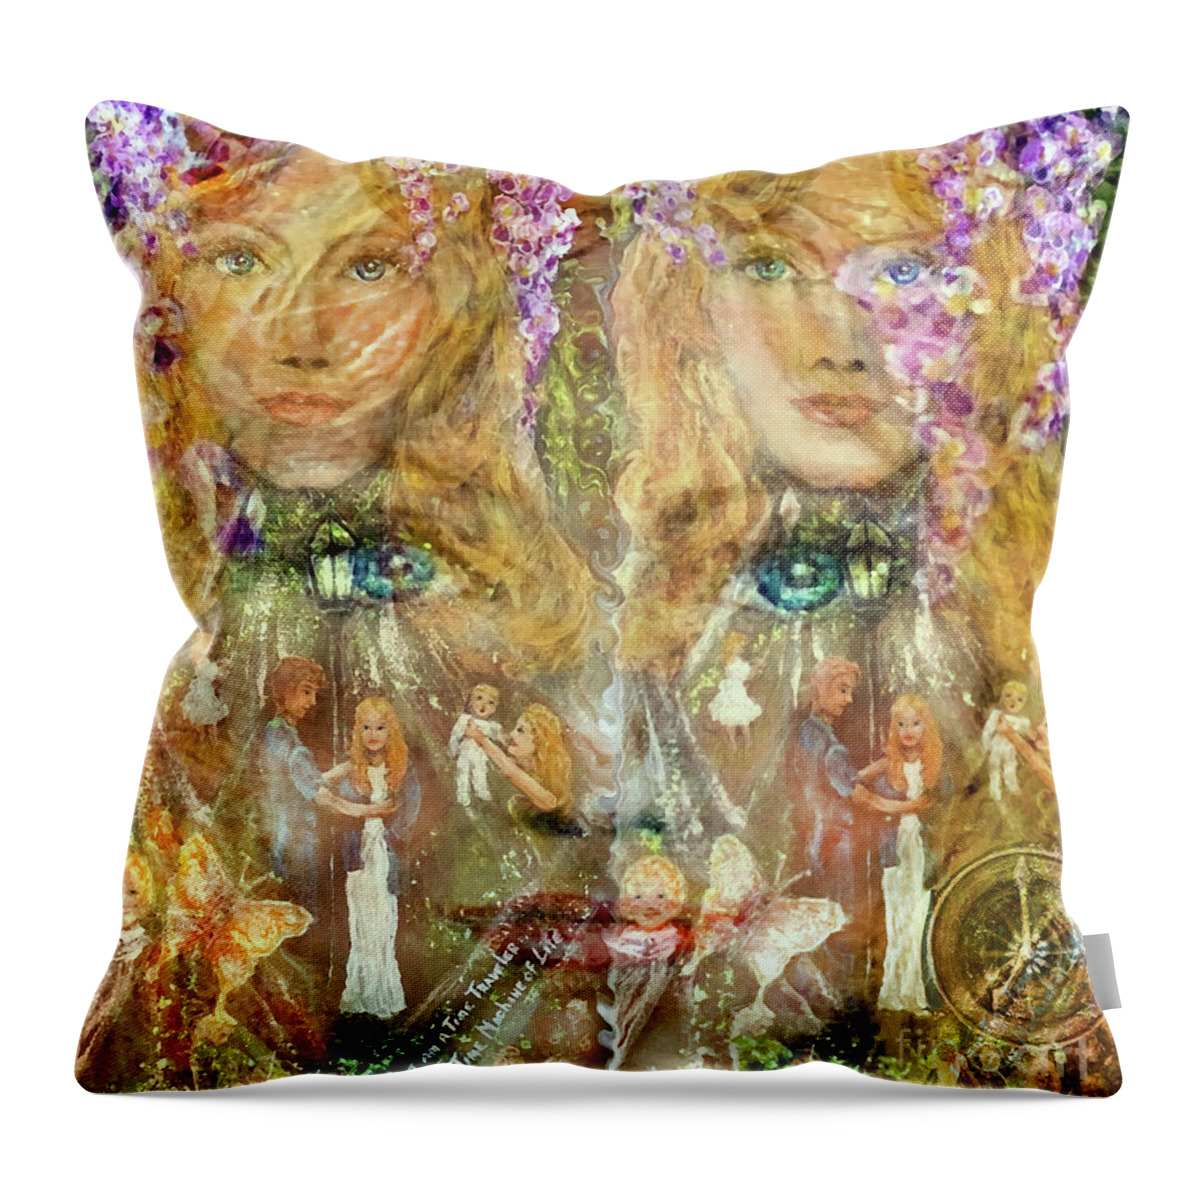 Choices Throw Pillow featuring the painting It is all about Choices by Bonnie Marie